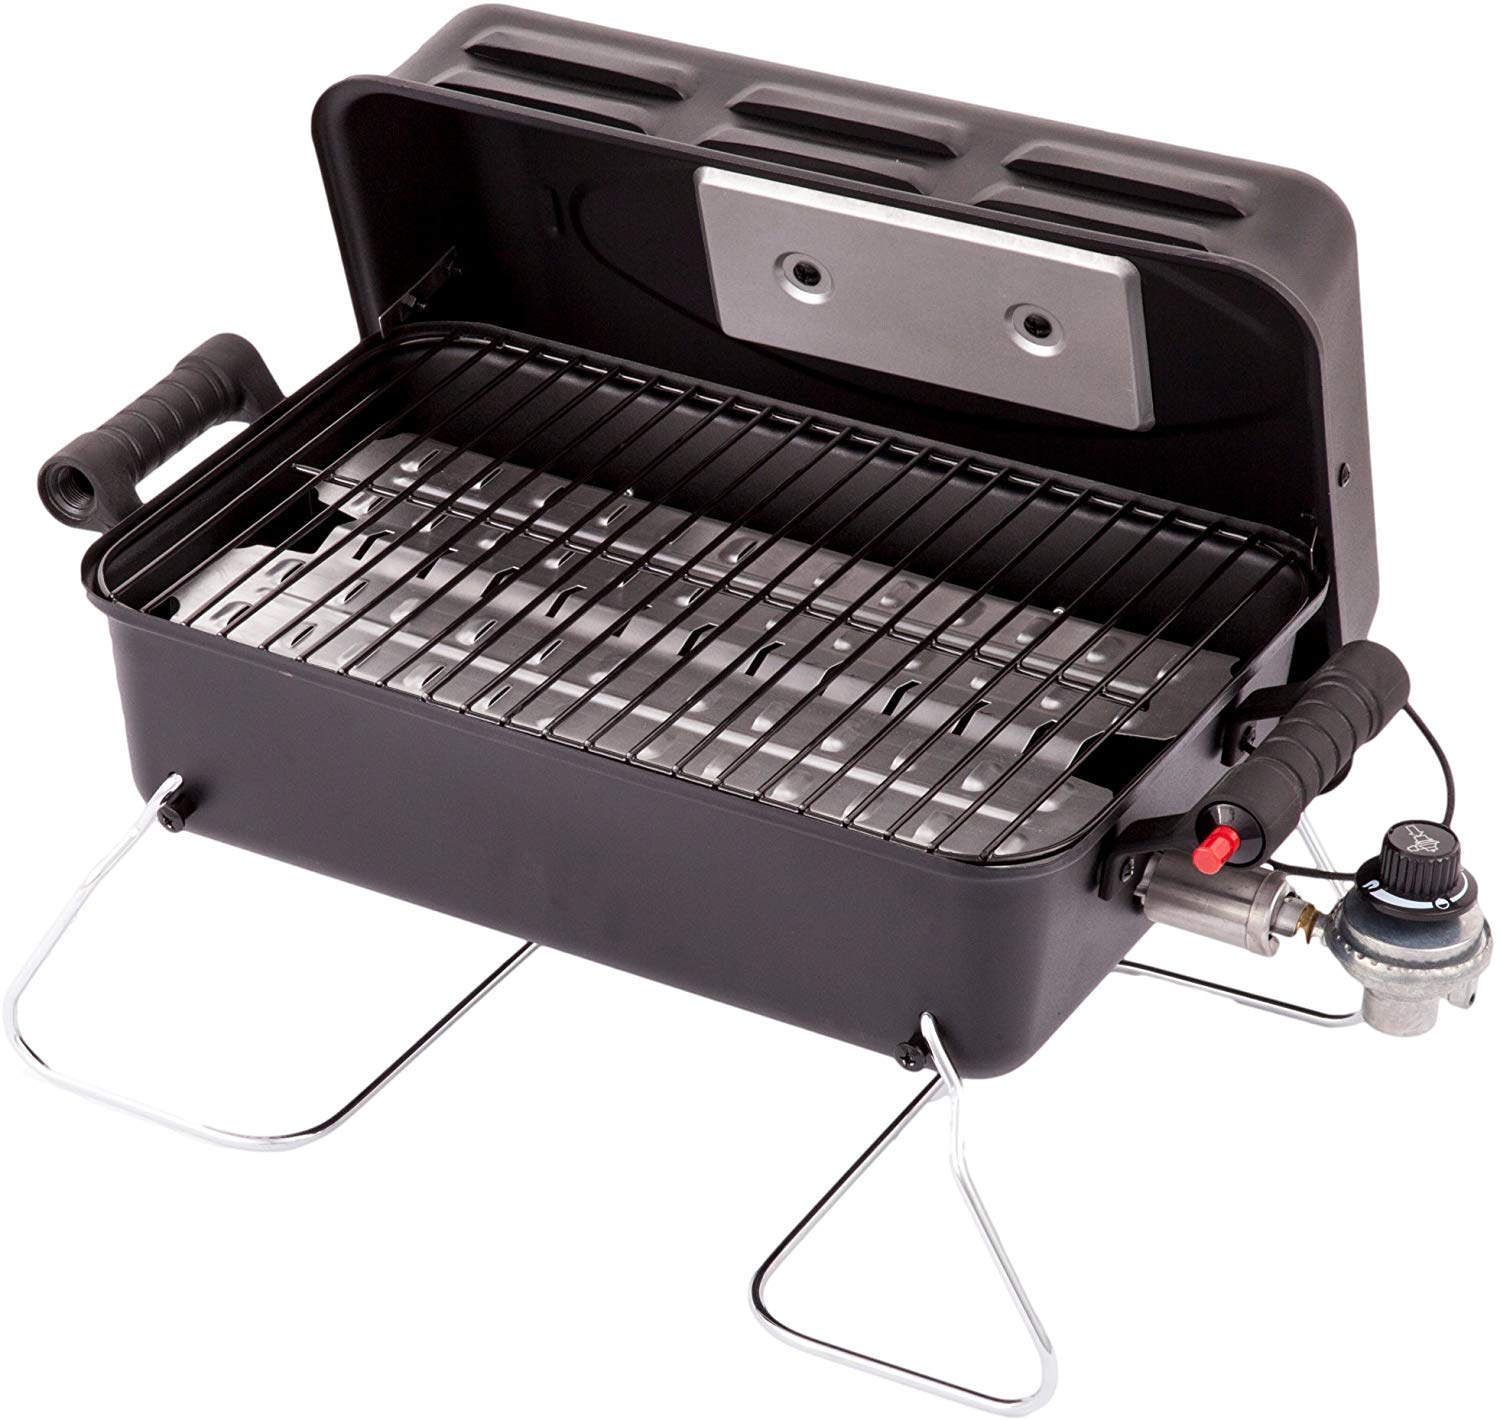 The Char-Broil Portable Propane Grill